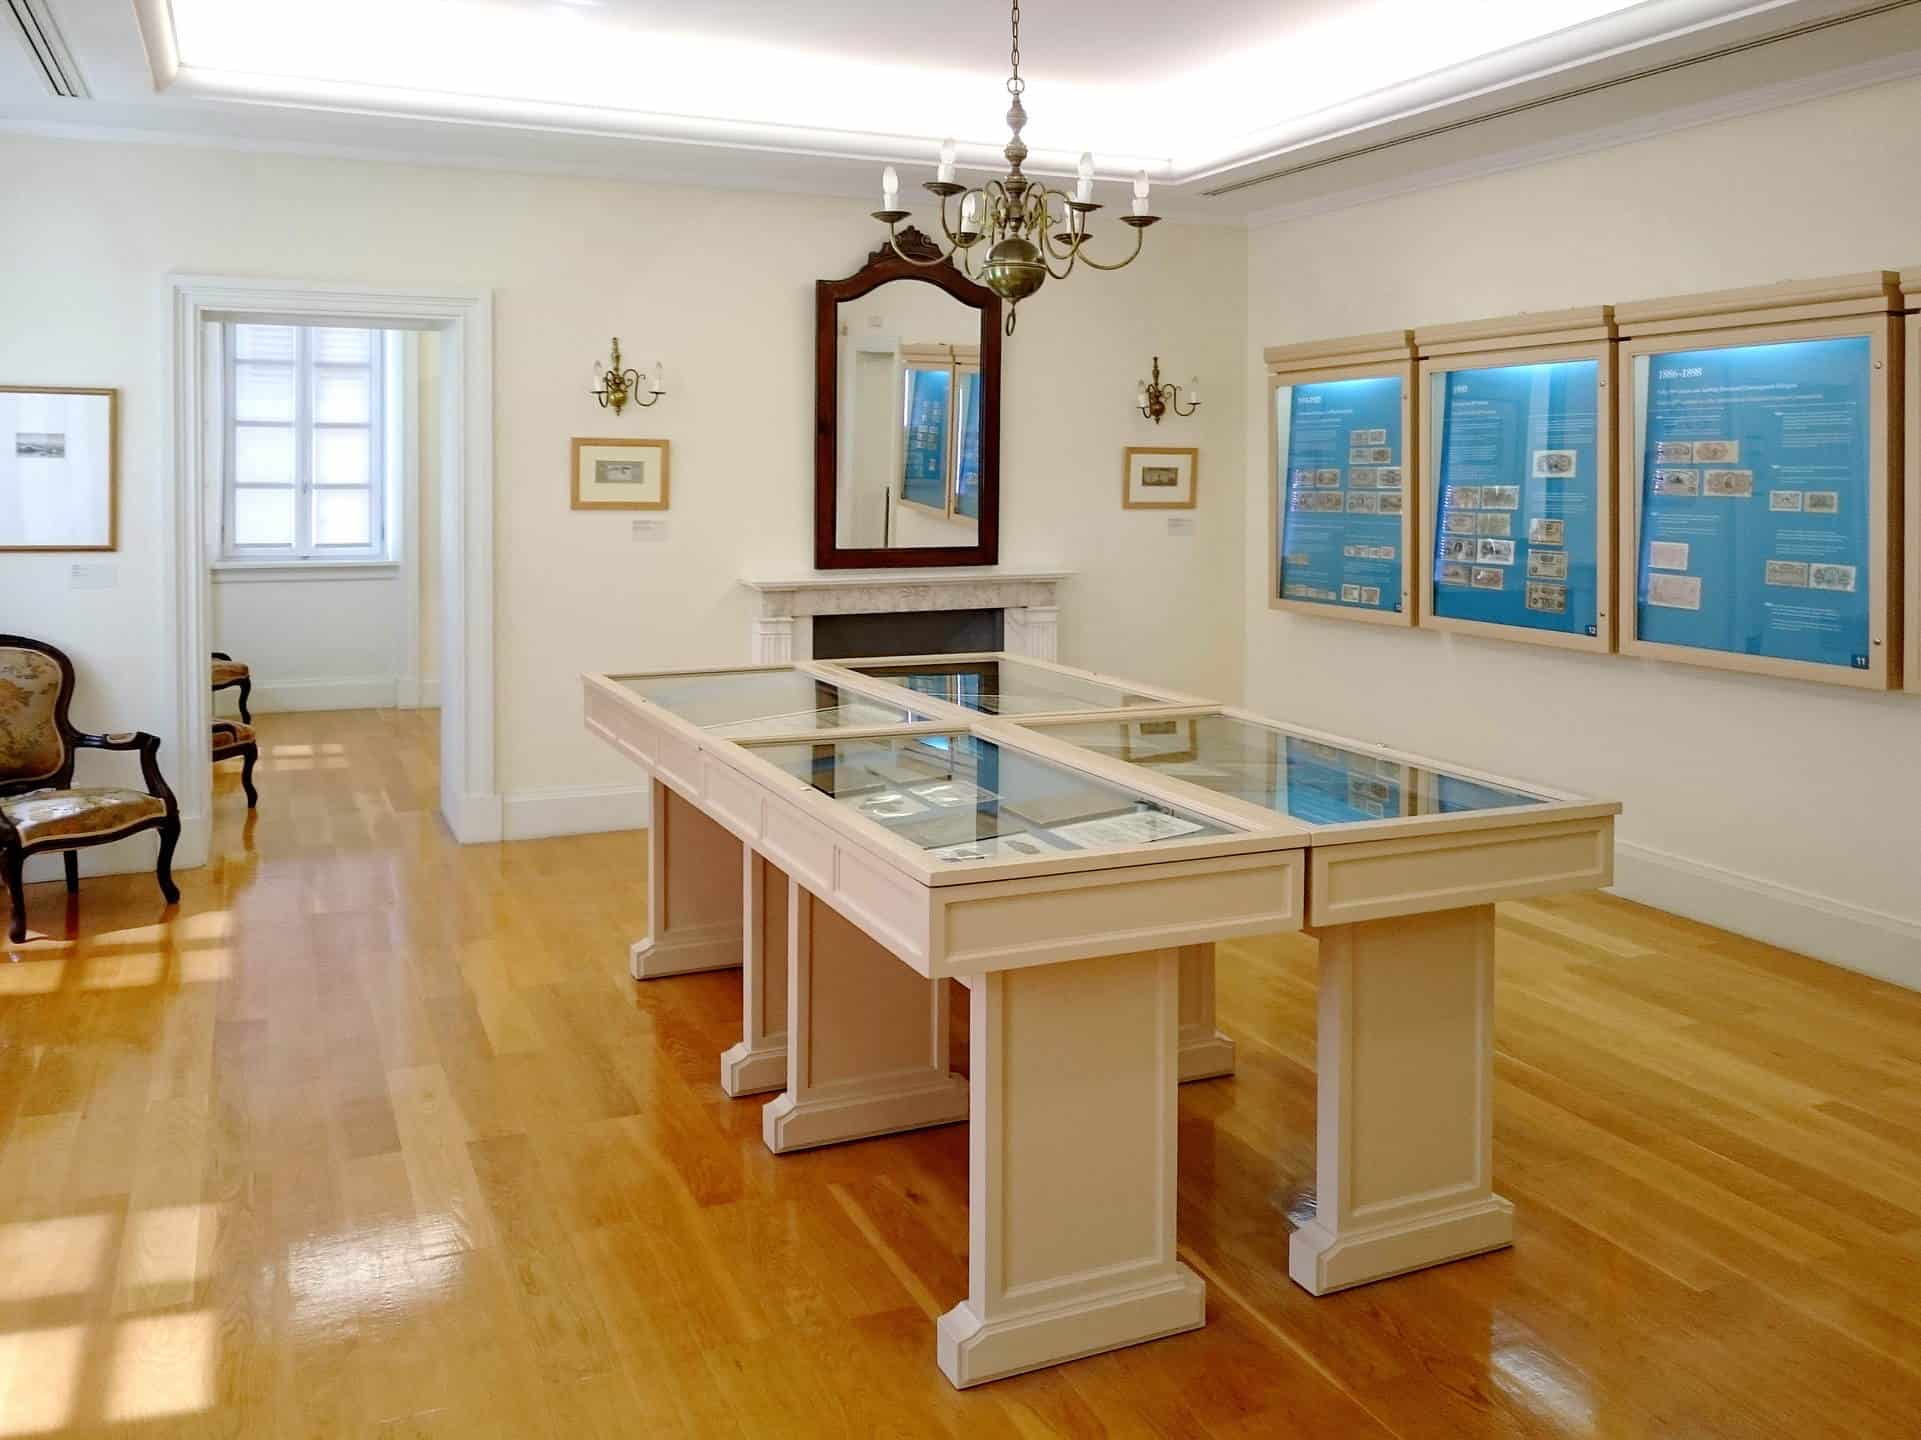 Banknote Museum of the Ionian Bank